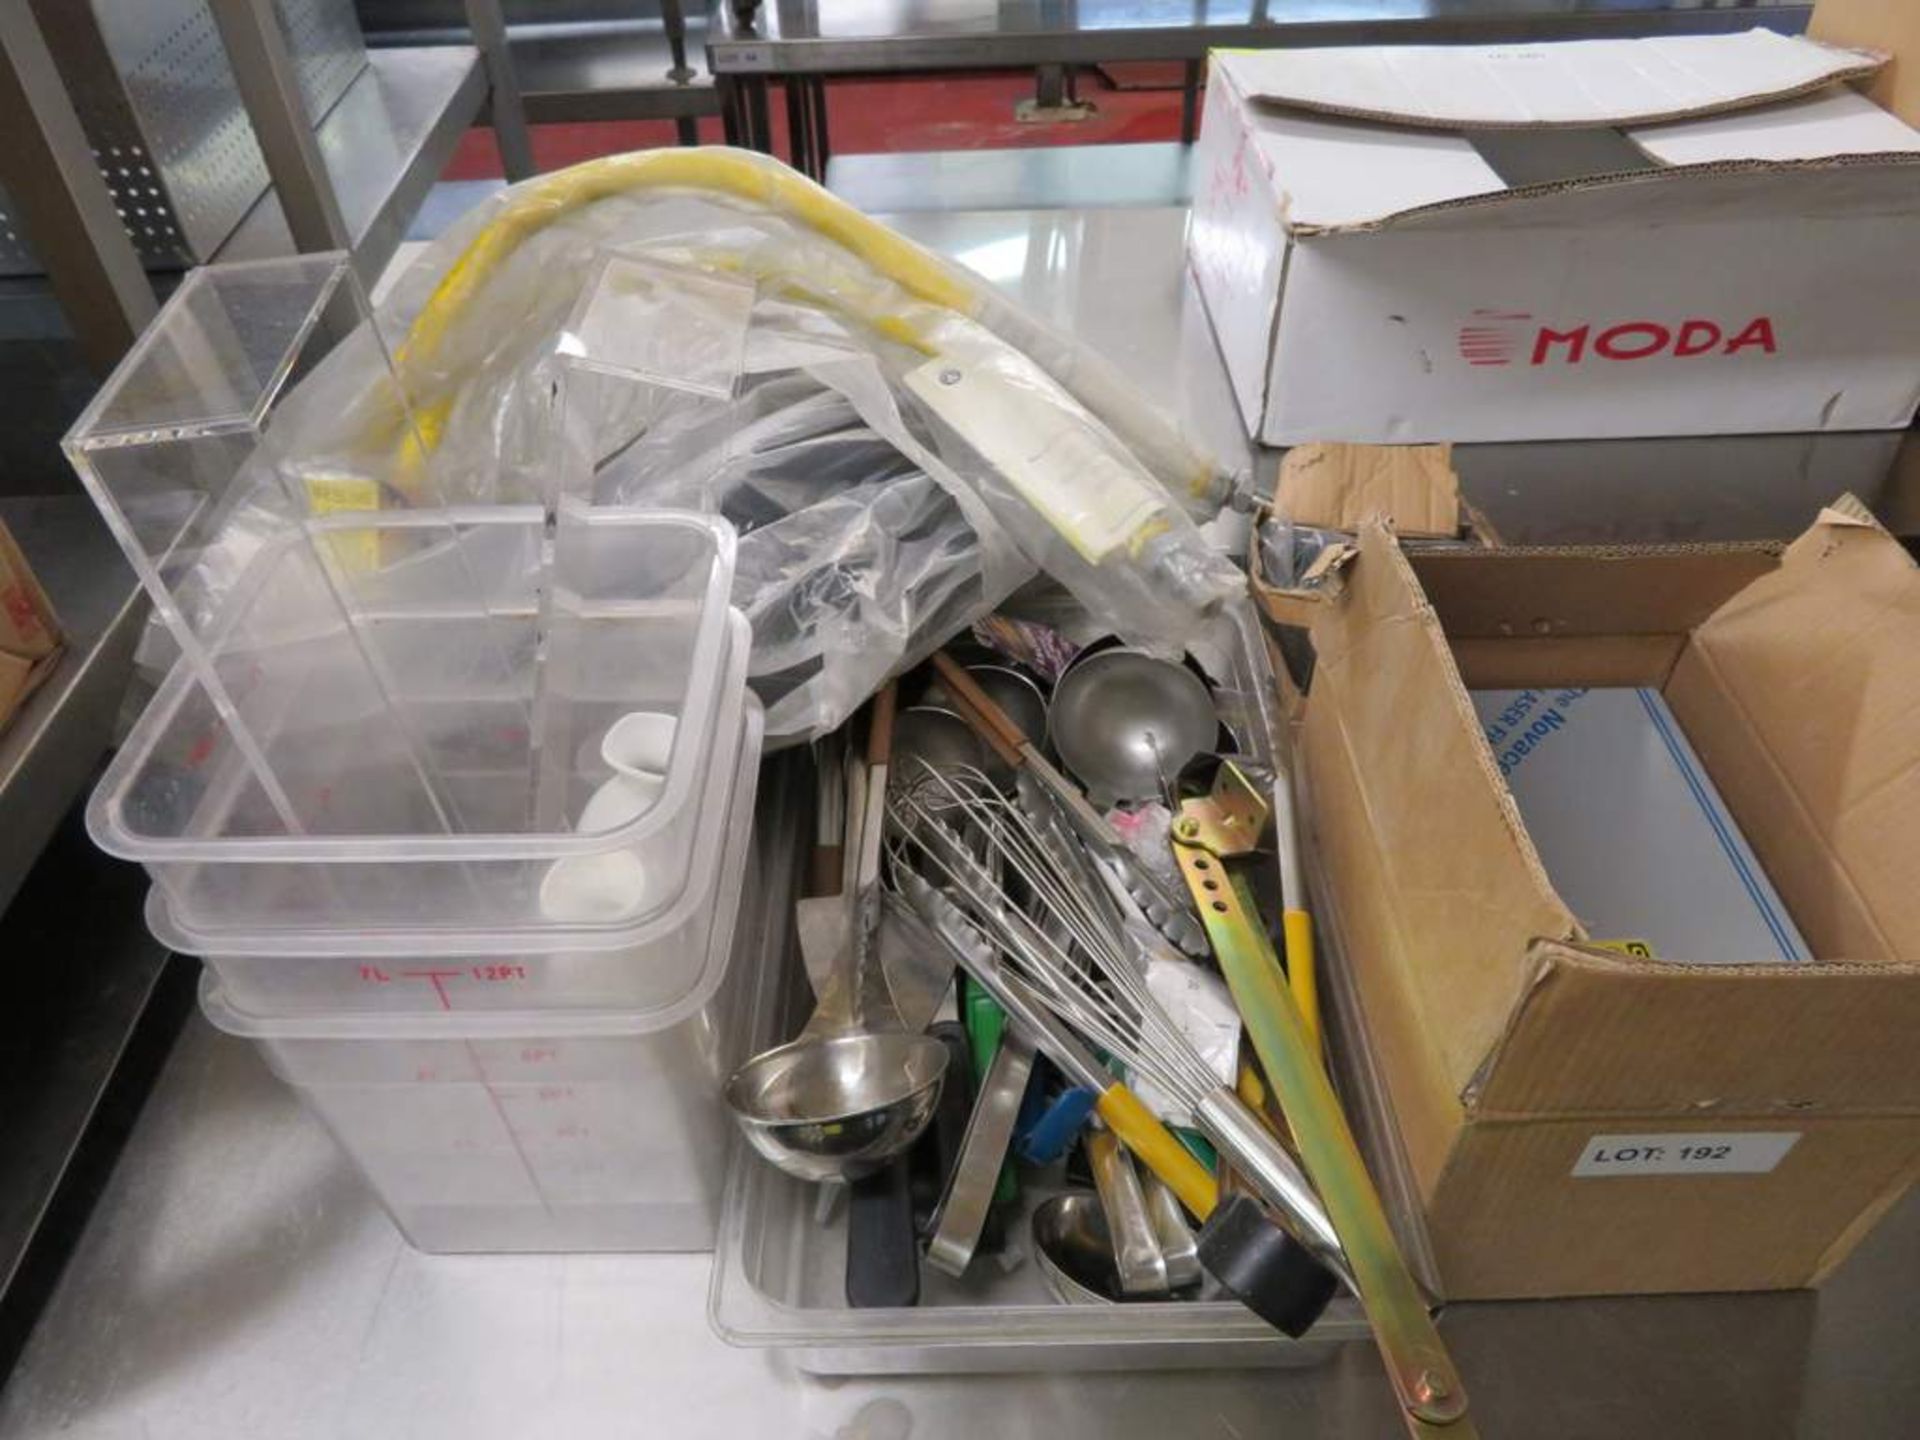 Quantity of various kitchen untensils, drinking glasses, cable trunking, etc.